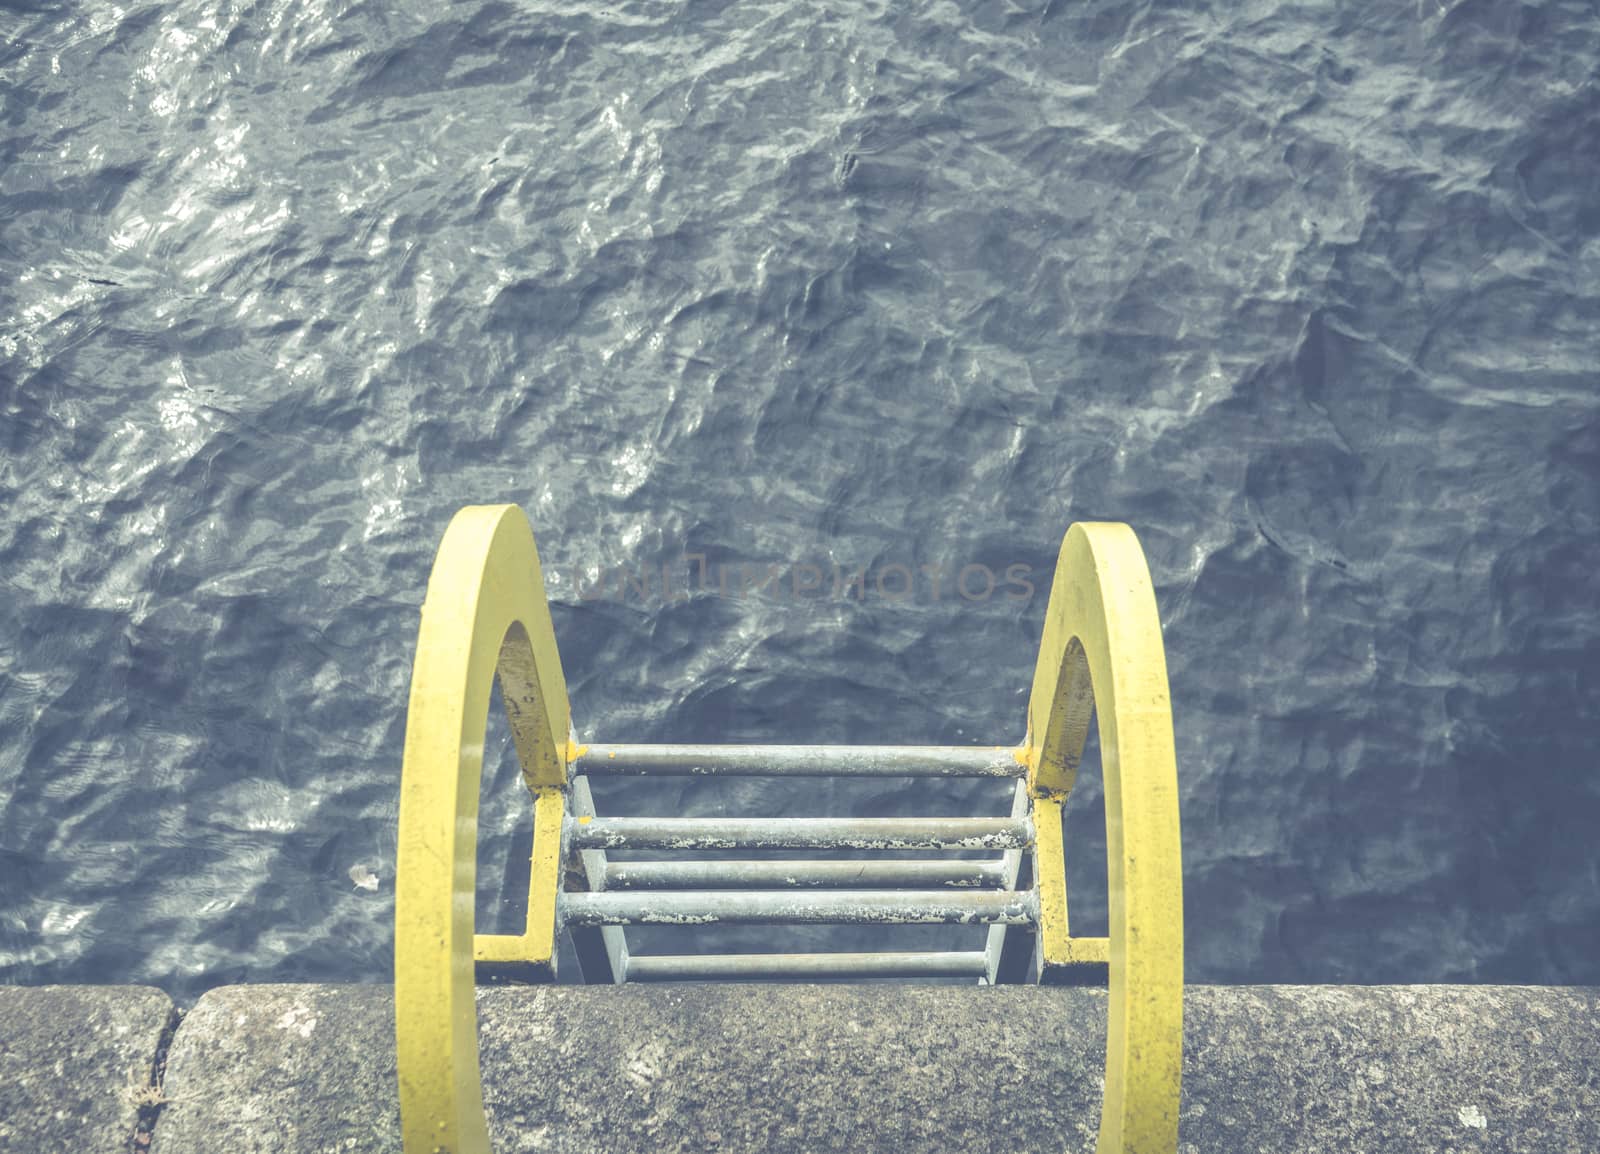 Conceptual Image Of A Yellow Ladder Into Blue Ocean Water At A Harbor